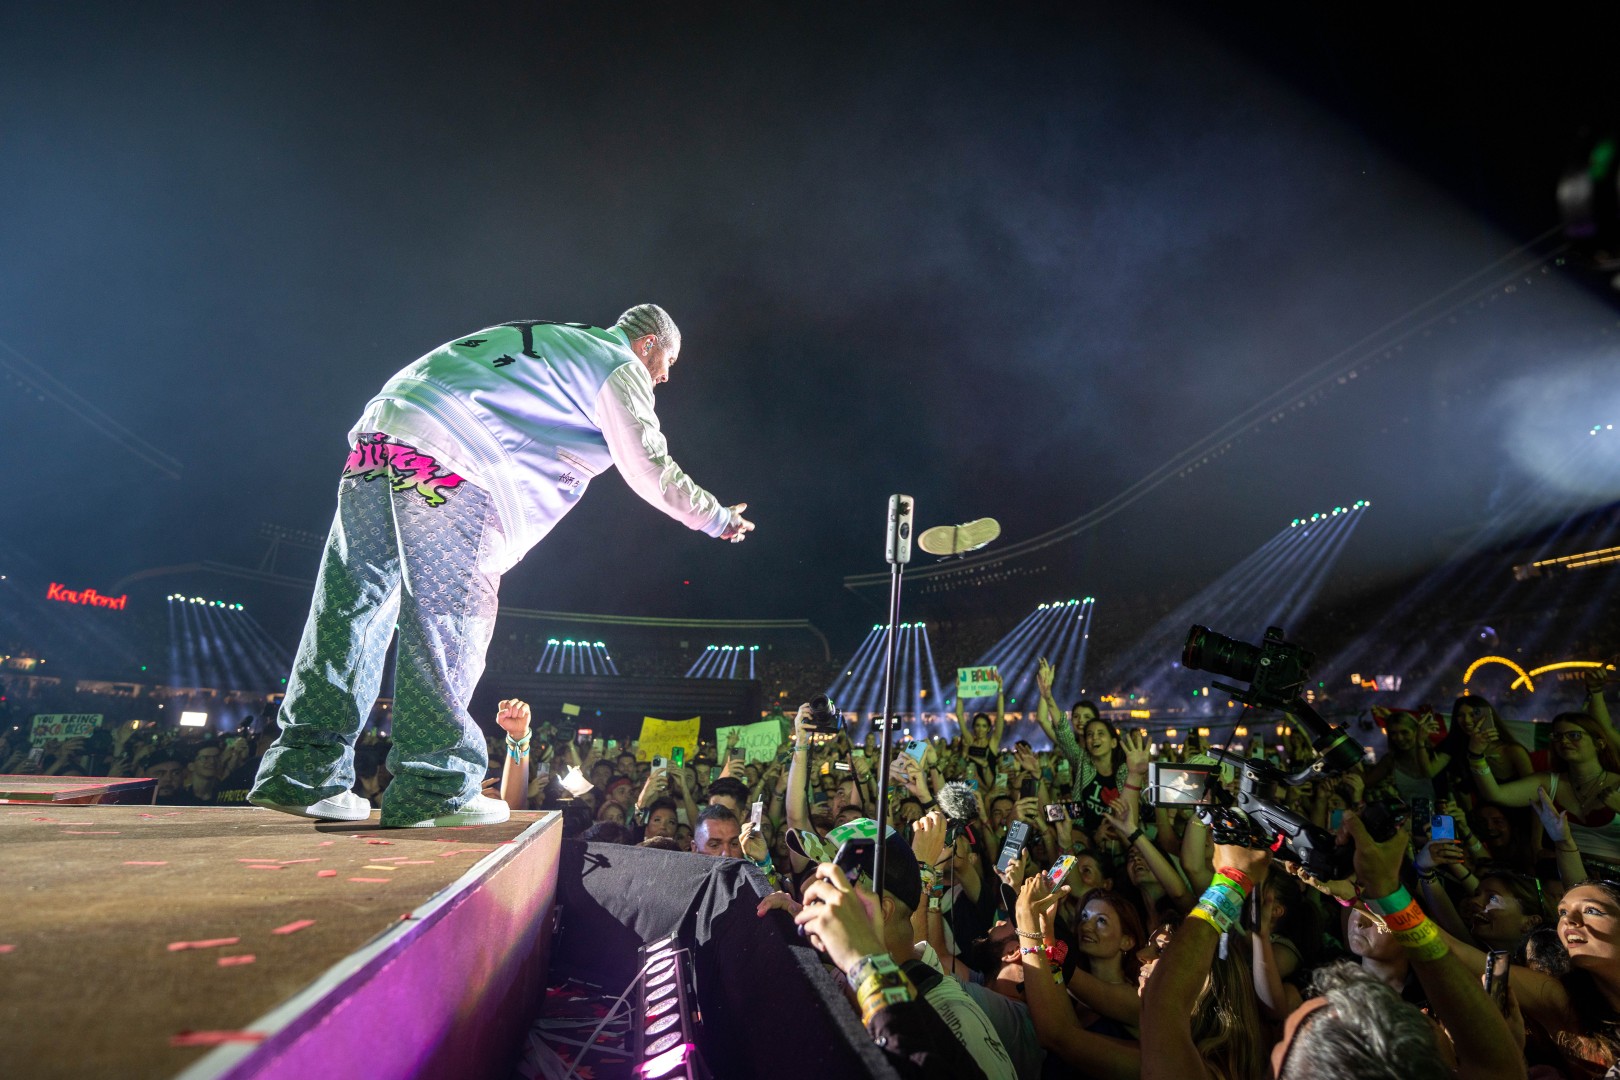 J Balvin at Cluj Arena in Cluj-Napoca on August 7, 2022 (c09b4a5e7b)